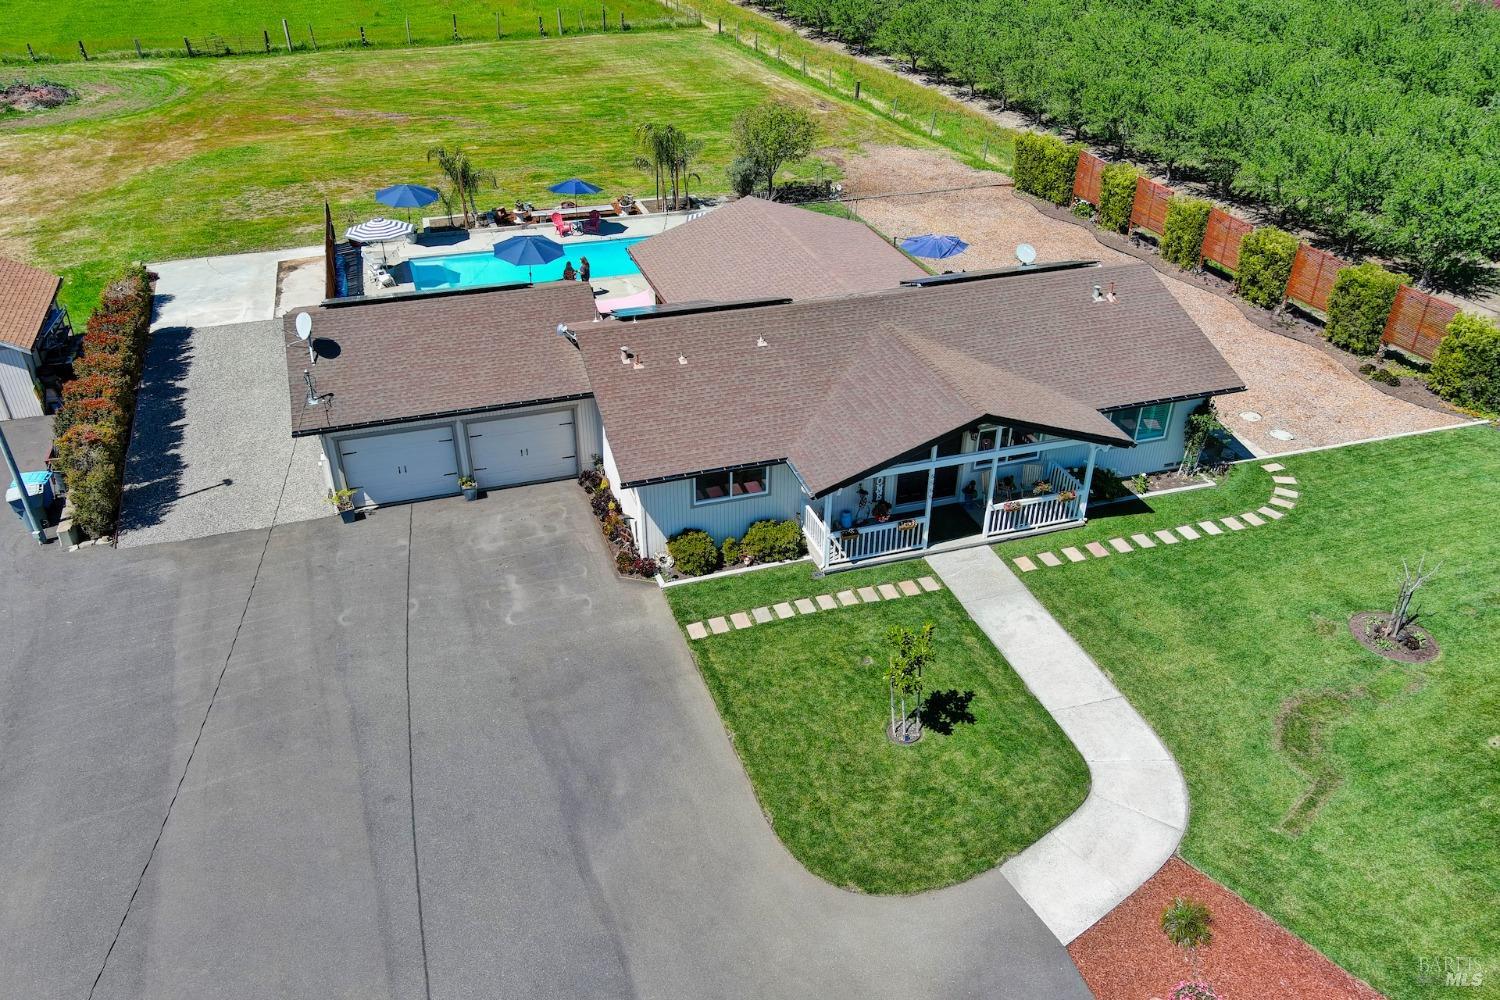 Photo of 6565 Byrnes Rd in Vacaville, CA